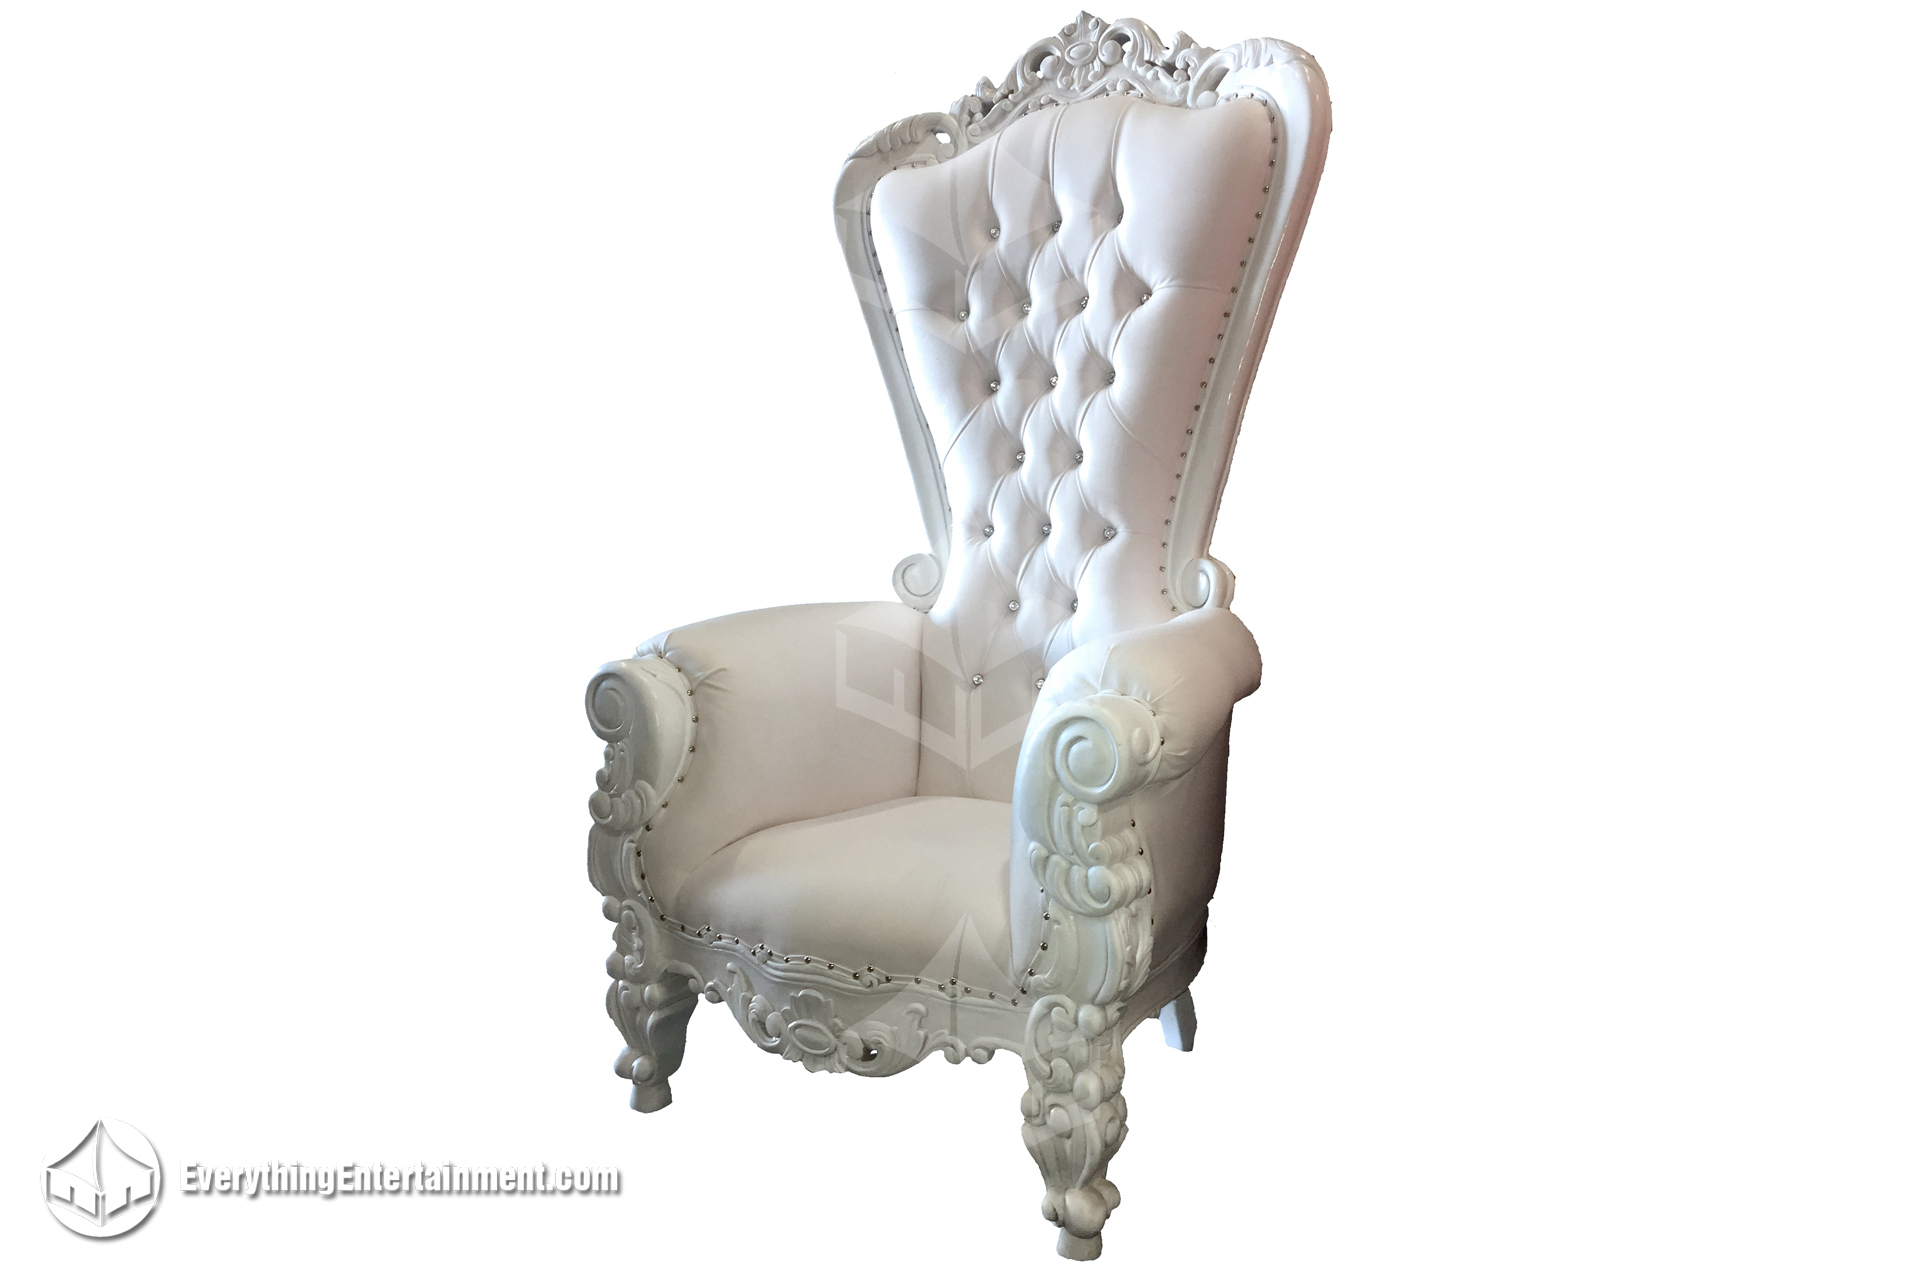  Throne Chairs – a royal touch